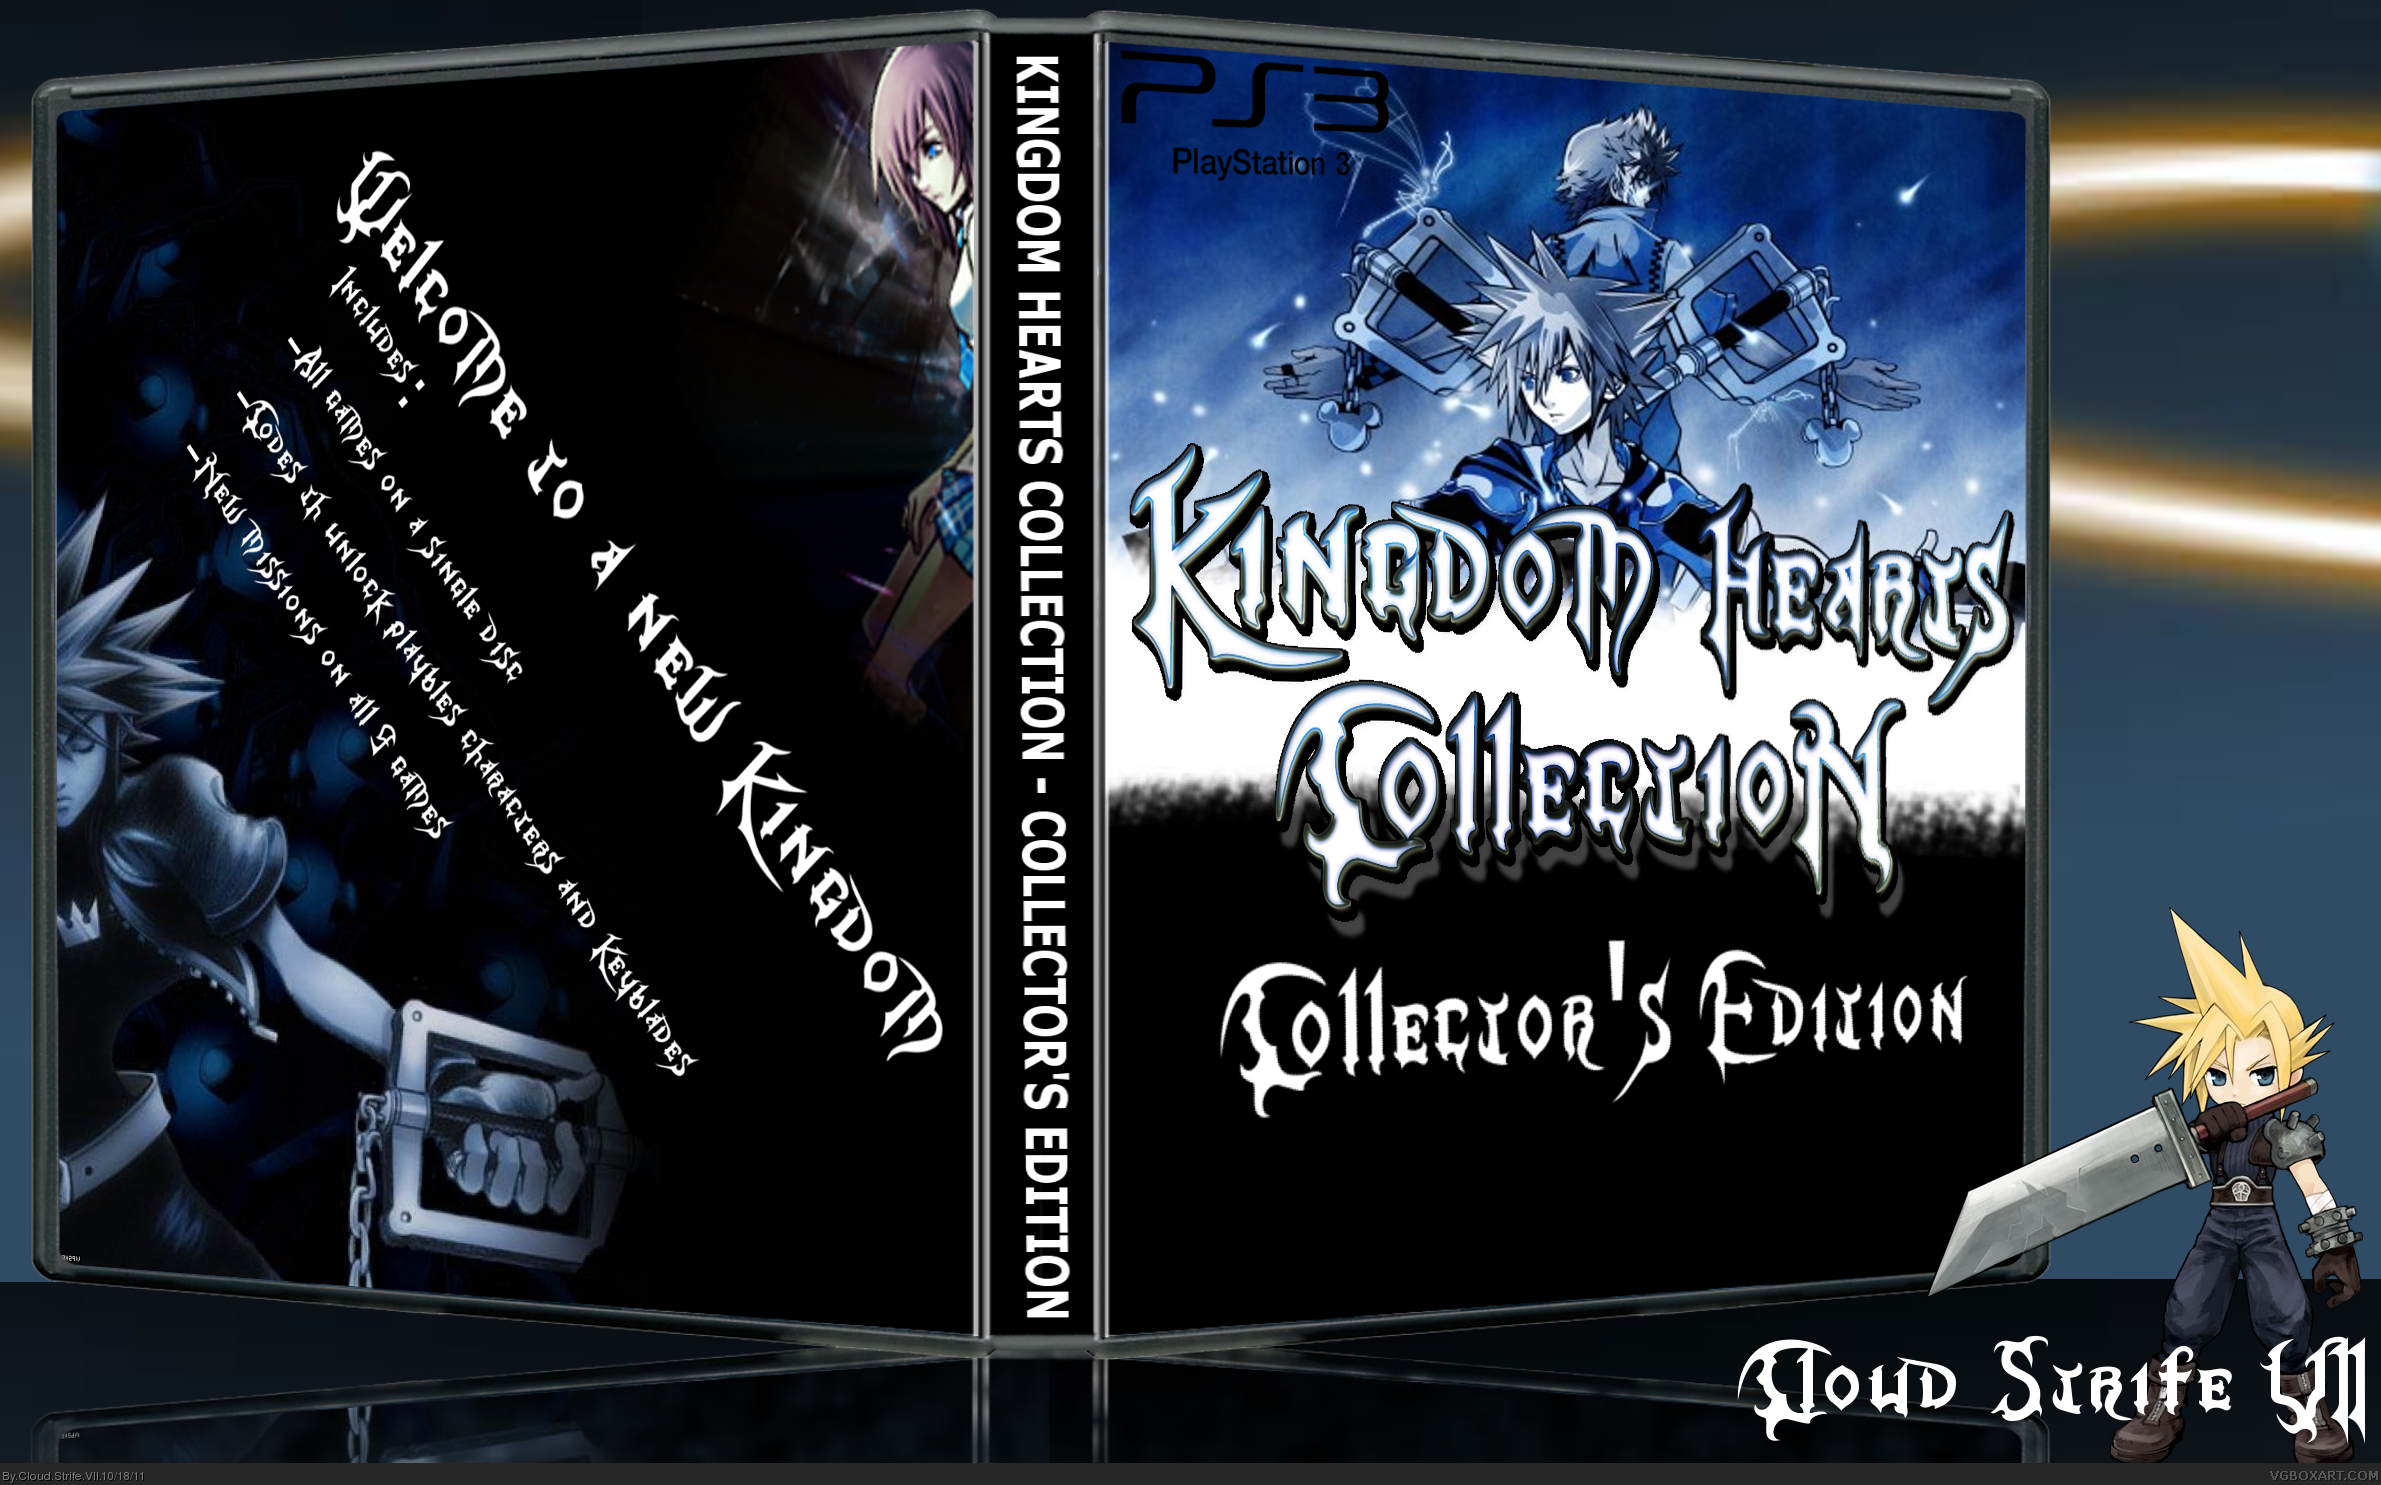 Kingdom Hearts Collection - Collector's Edition box cover